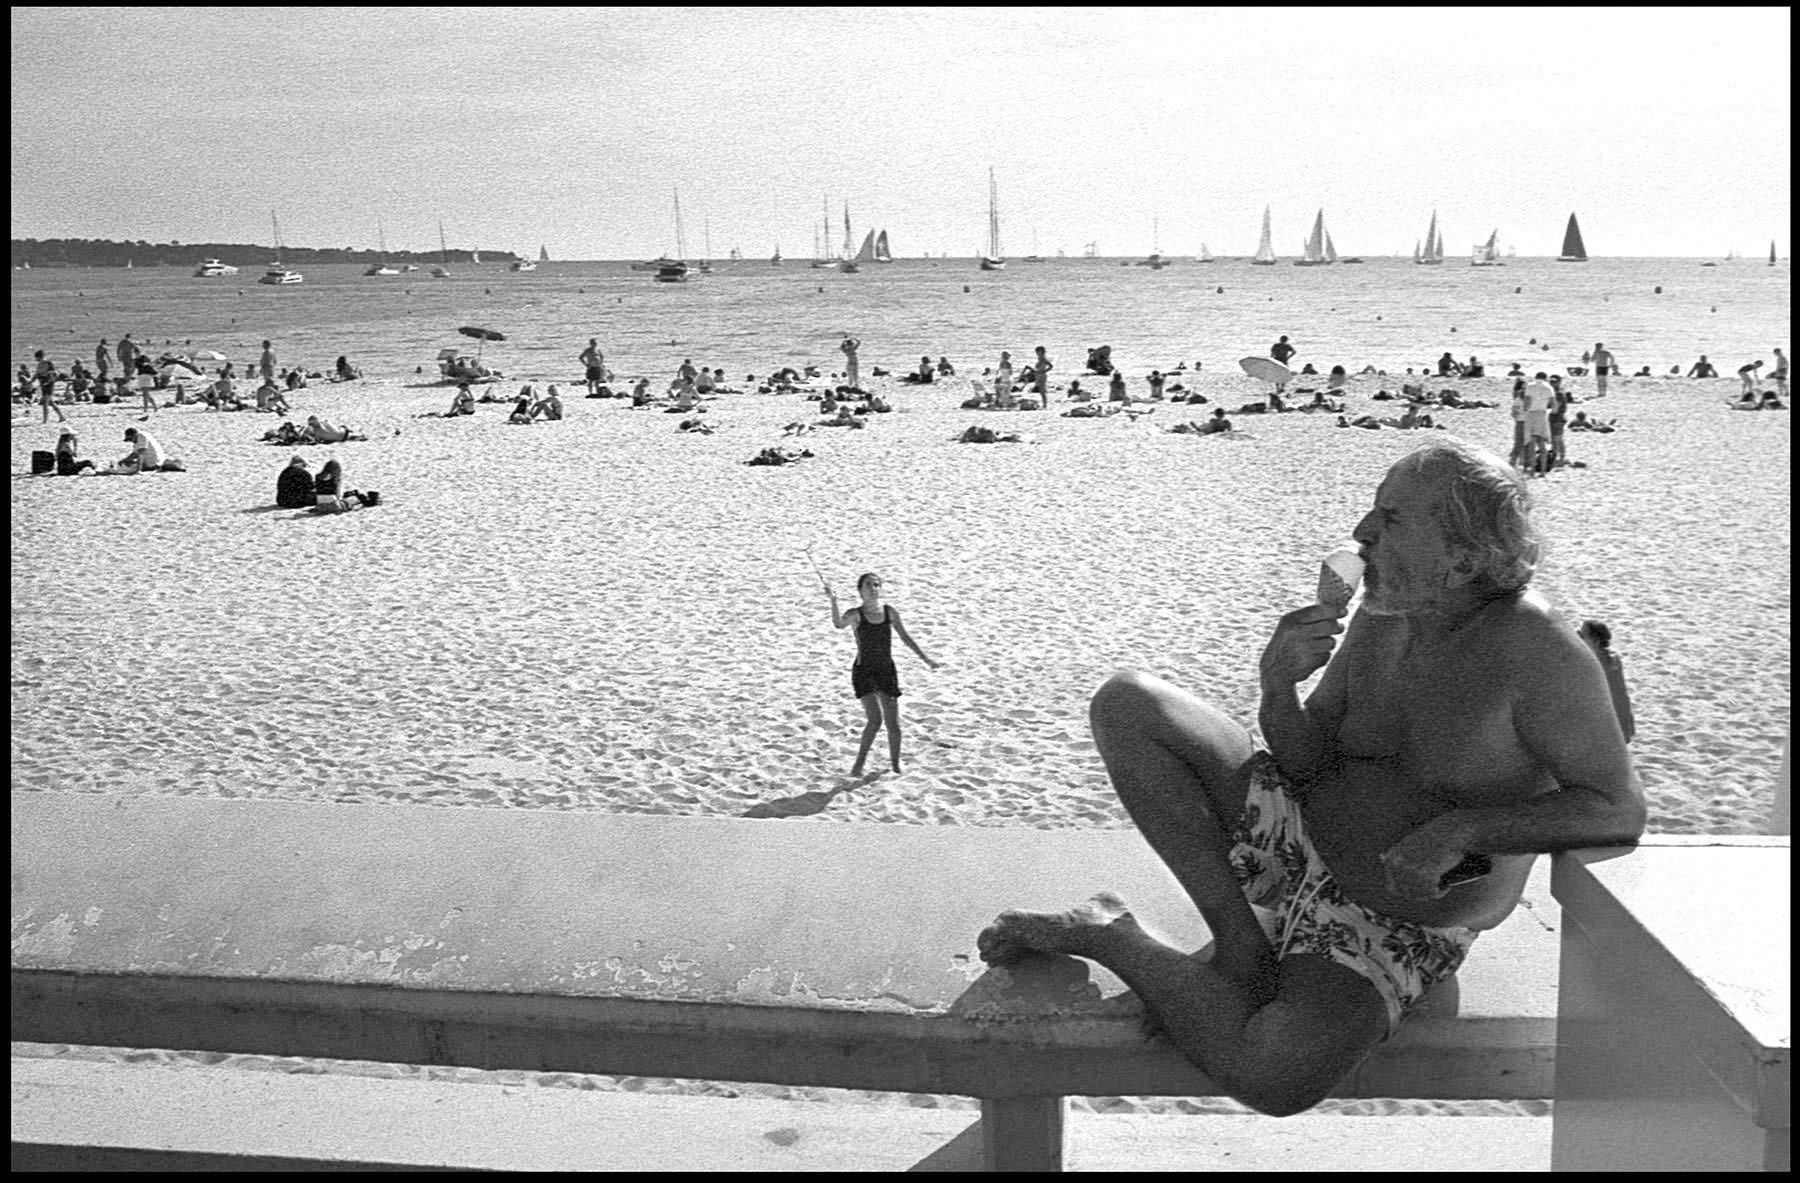 French Riviera, Cote d'azur, Cannes, beach, ice cream, eating ice cream, man, ocean, boats, black&white, filmCannes, beach, ice cream, eating ice cream, man, ocean, boats, black&white, film